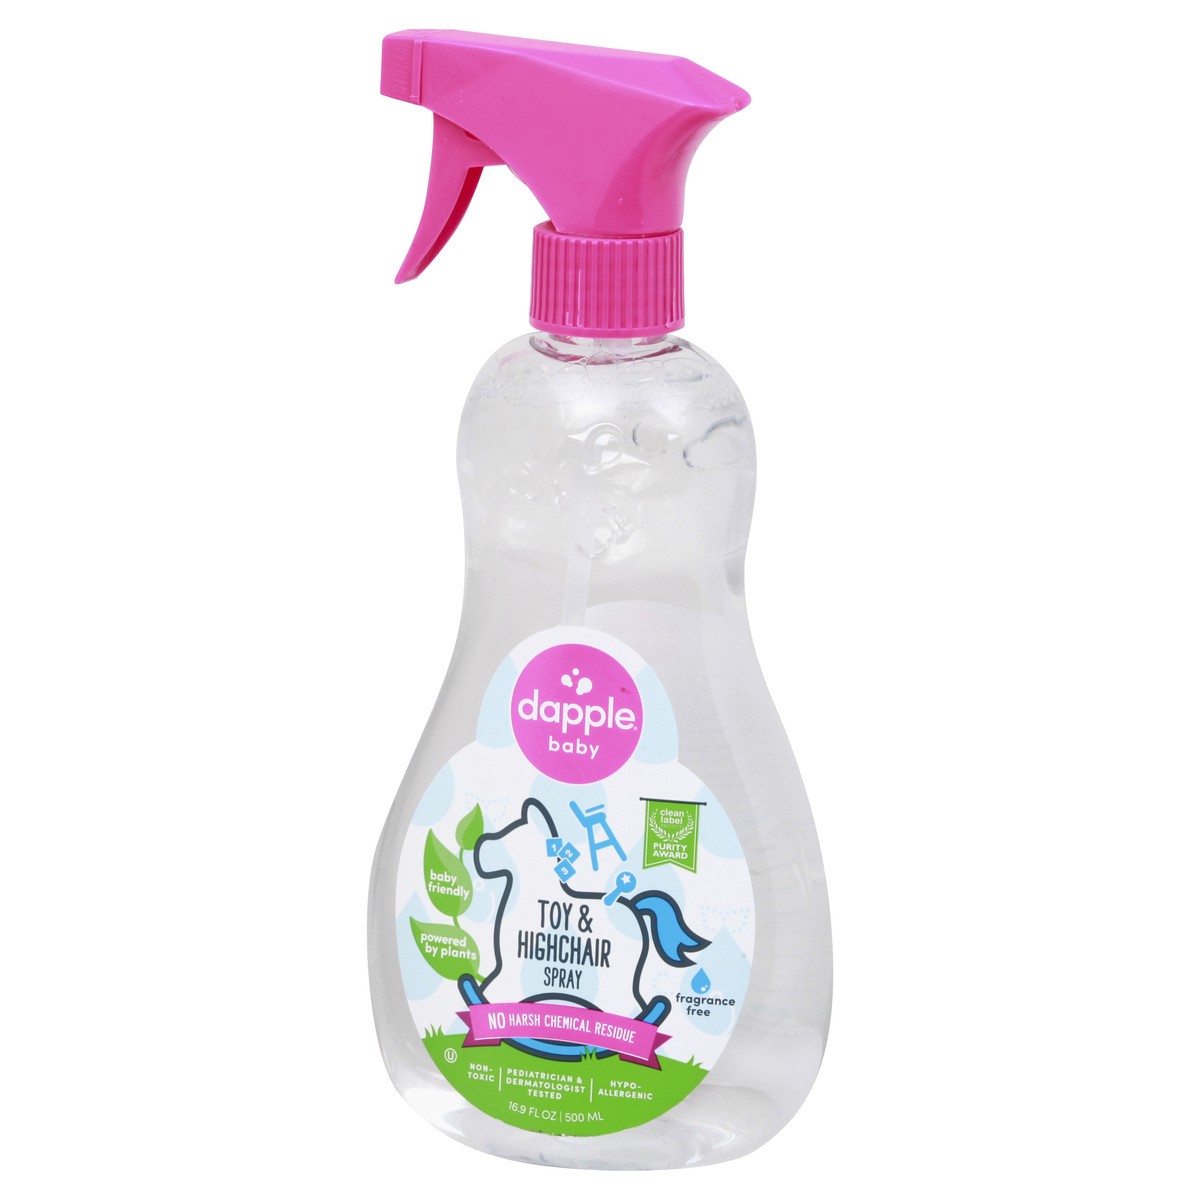 slide 3 of 9, Dapple Baby Toy & High Chair Cleaner Fragrance Free, 16.9 fl oz